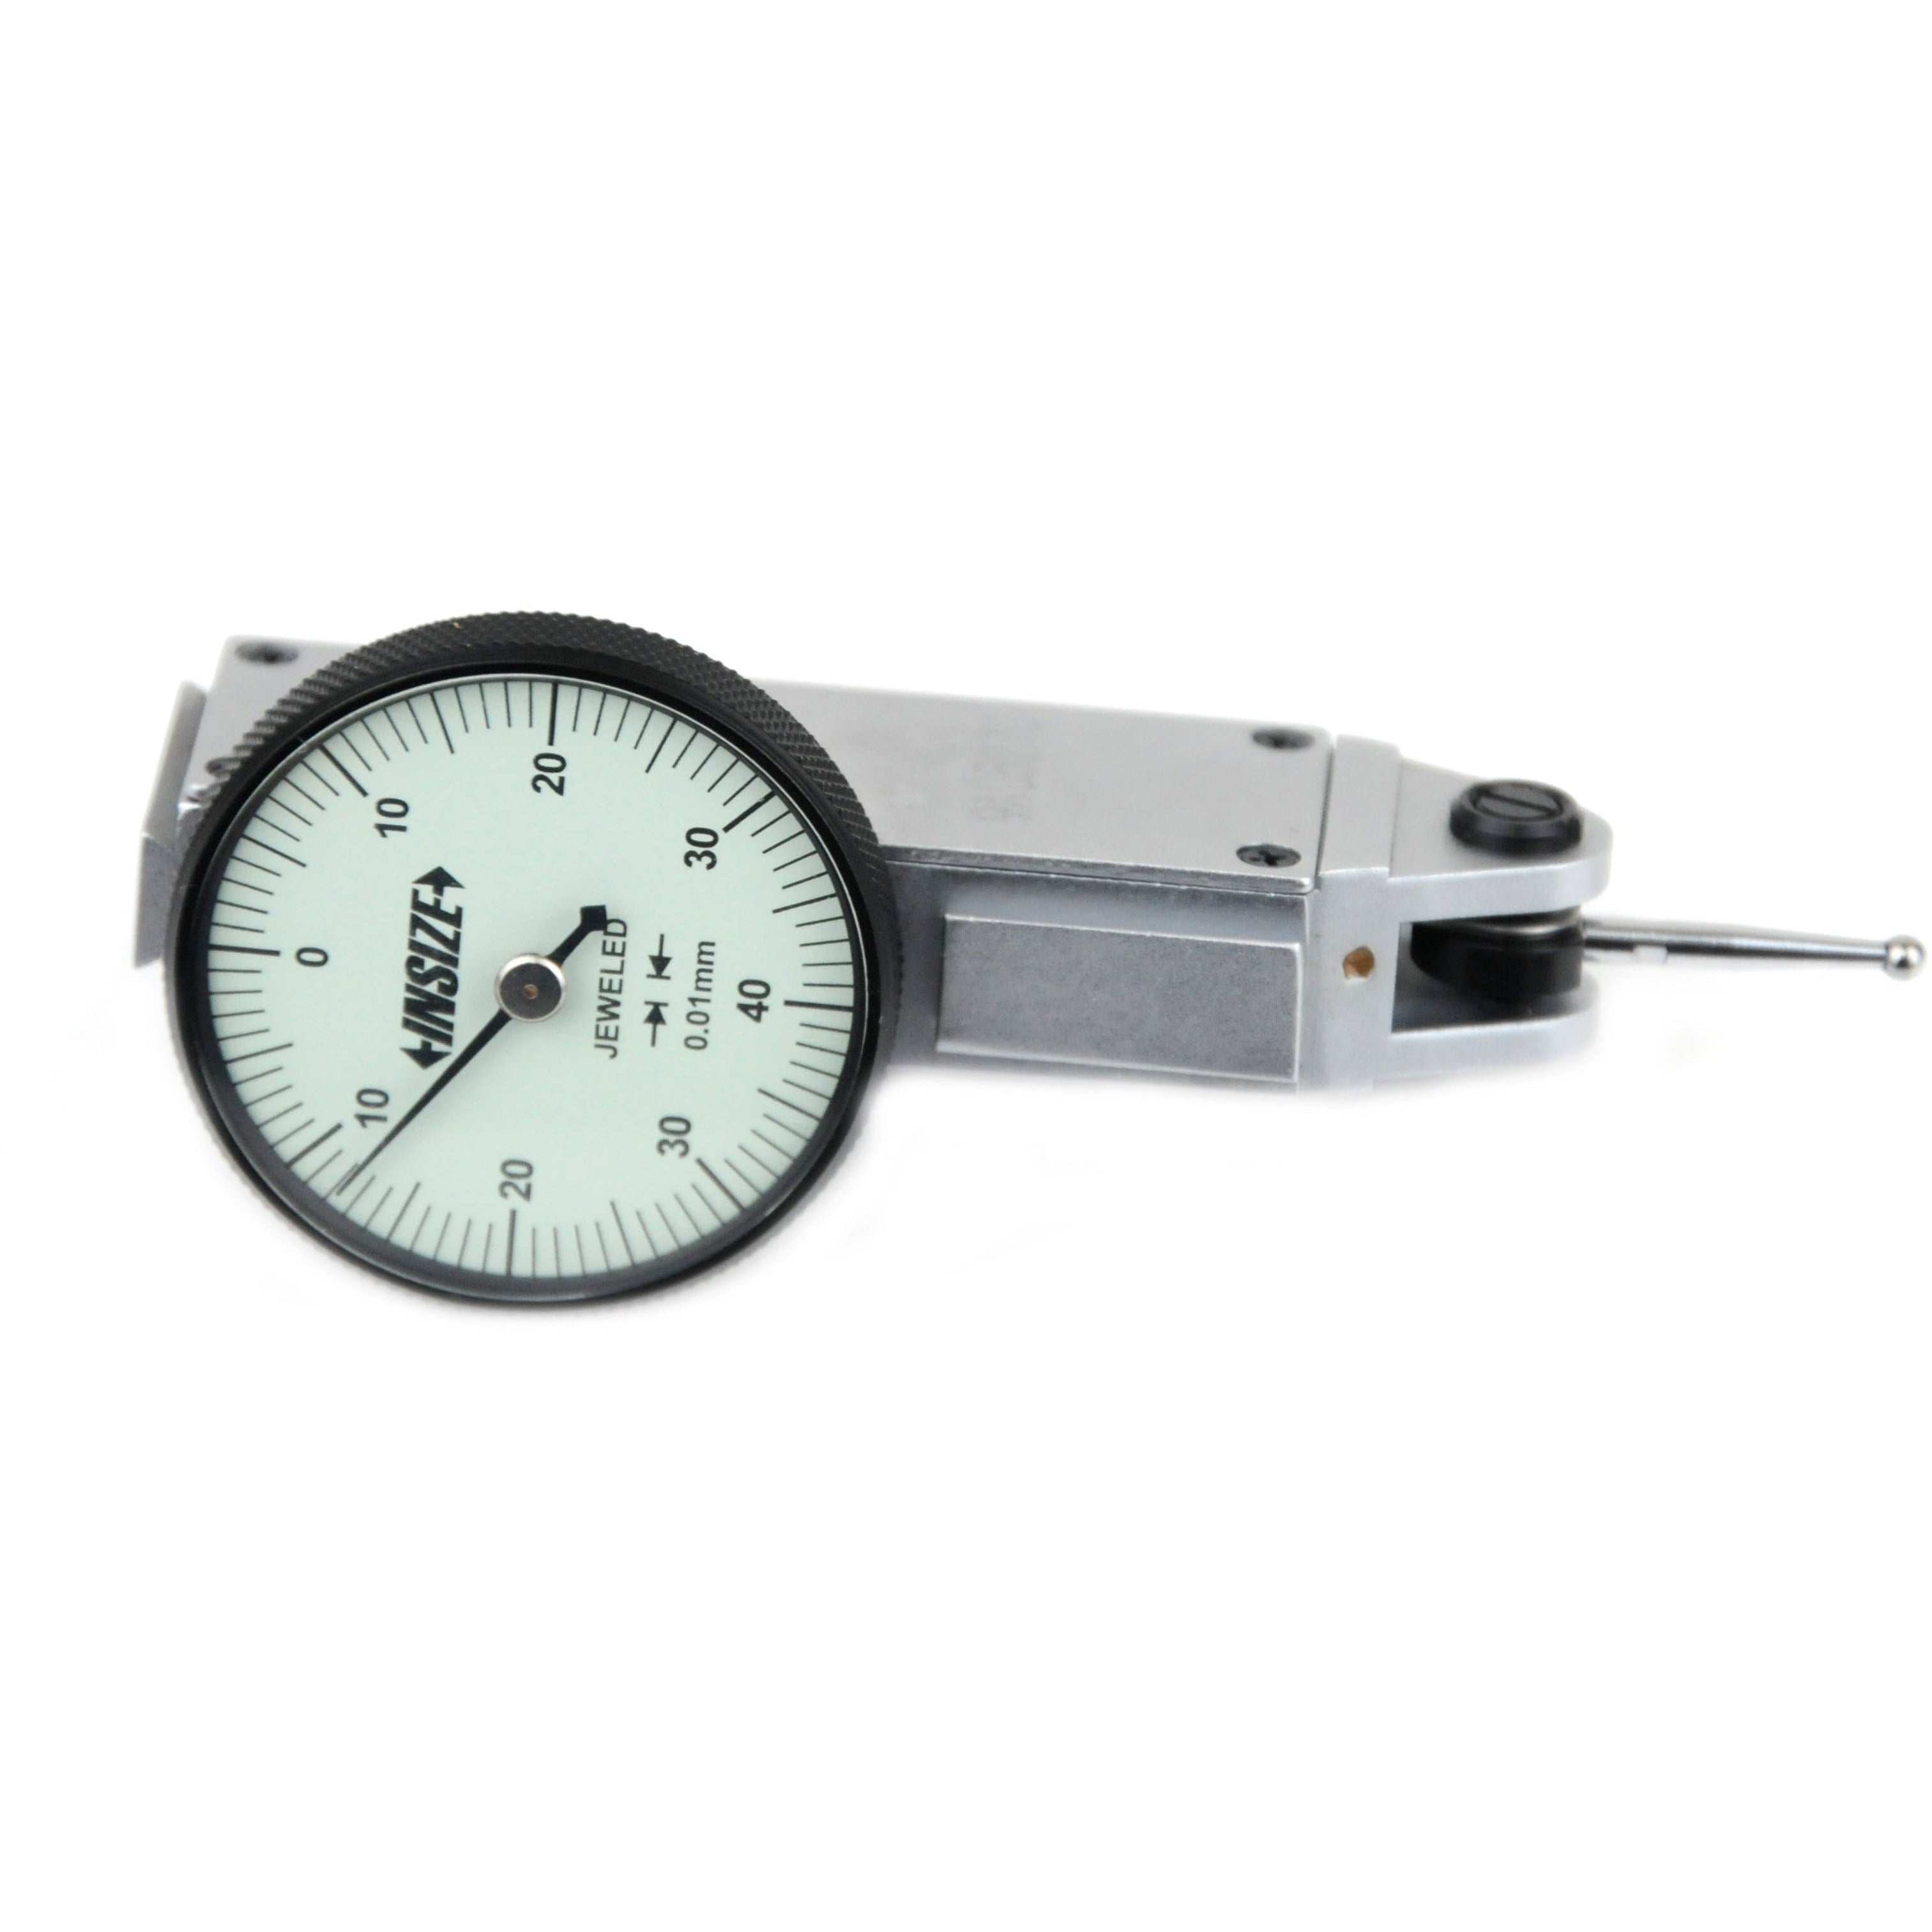 Dial Test Indicator | 0.8mm x 0.01mm | INSIZE 2380-08